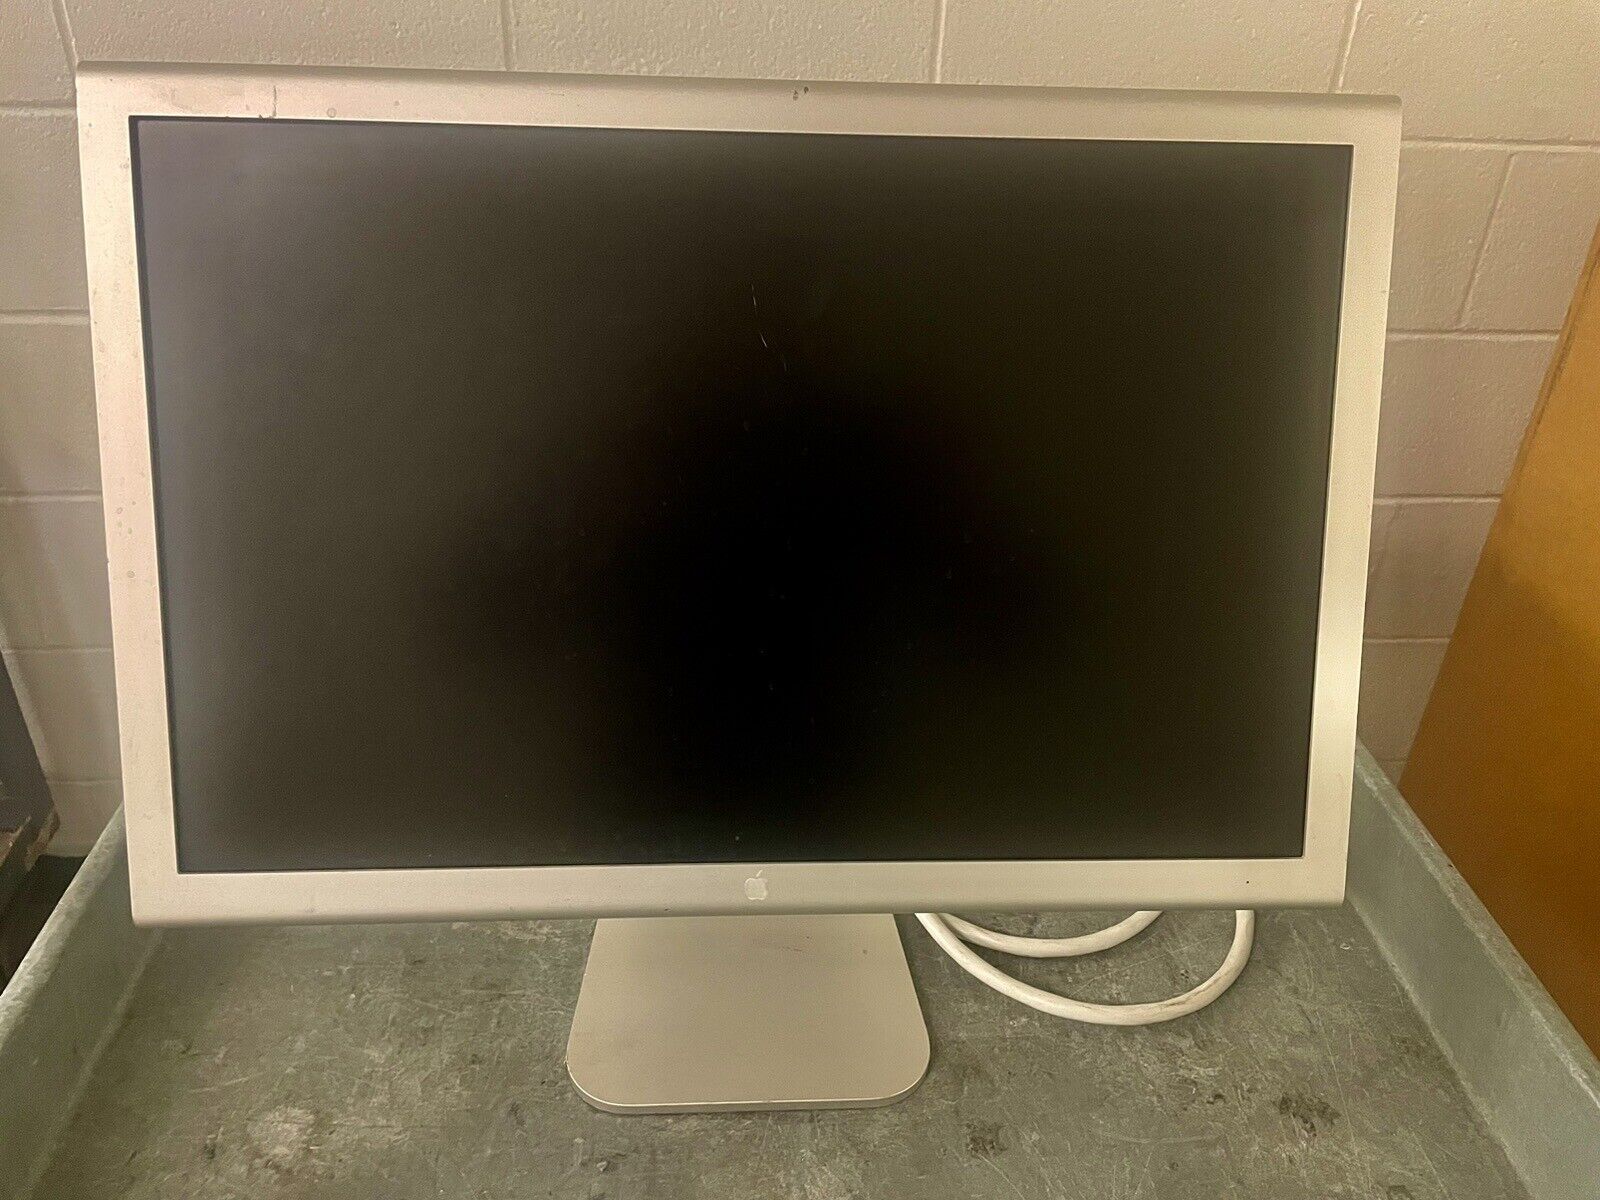 Apple A1081 20 inch Widescreen Cinema Display LCD Monitor •  A1081